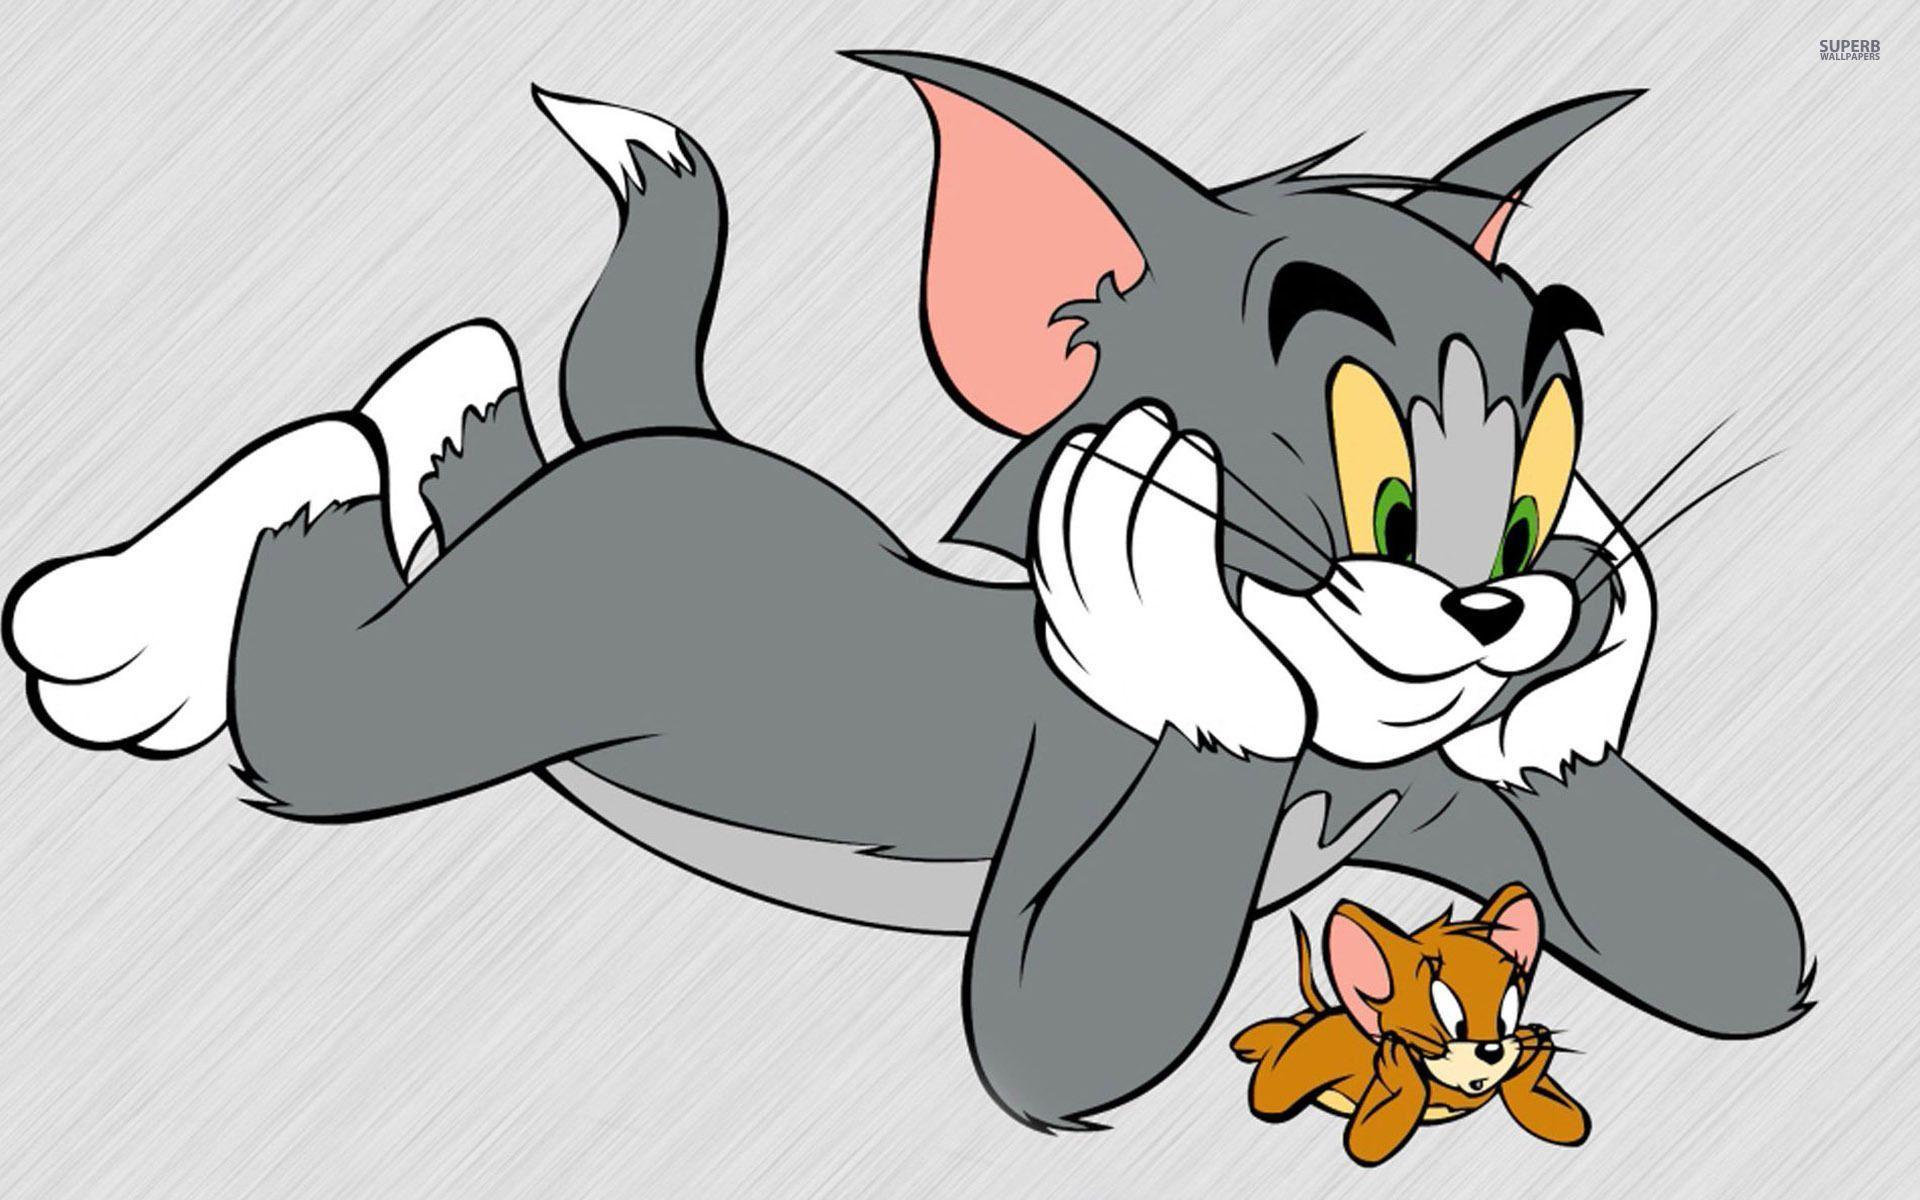 48 Tom And Jerry Image for Free